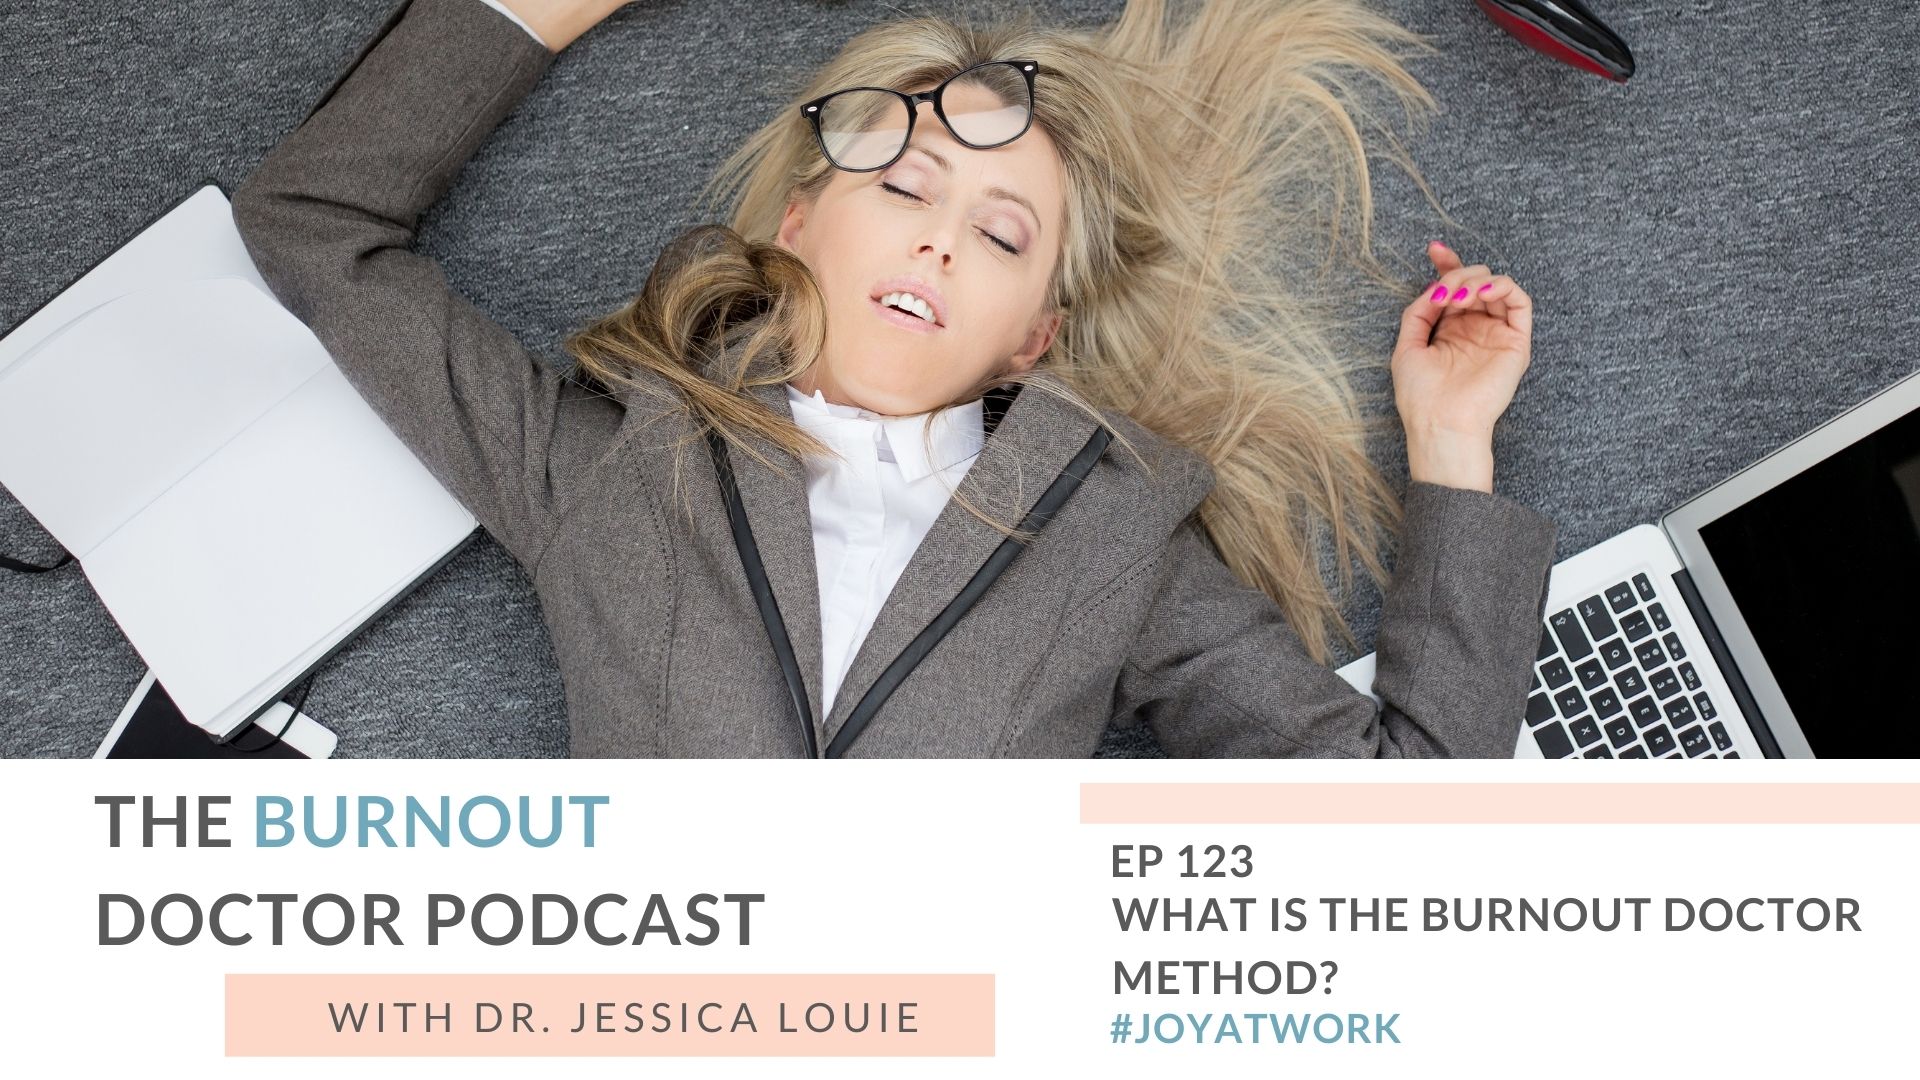 What is the burnout doctor method? Dr. Jessica Louie The Burnout Doctor Podcast. Pharmacist burnout keynote speaker. Well-being speaker. Joy at Work course.